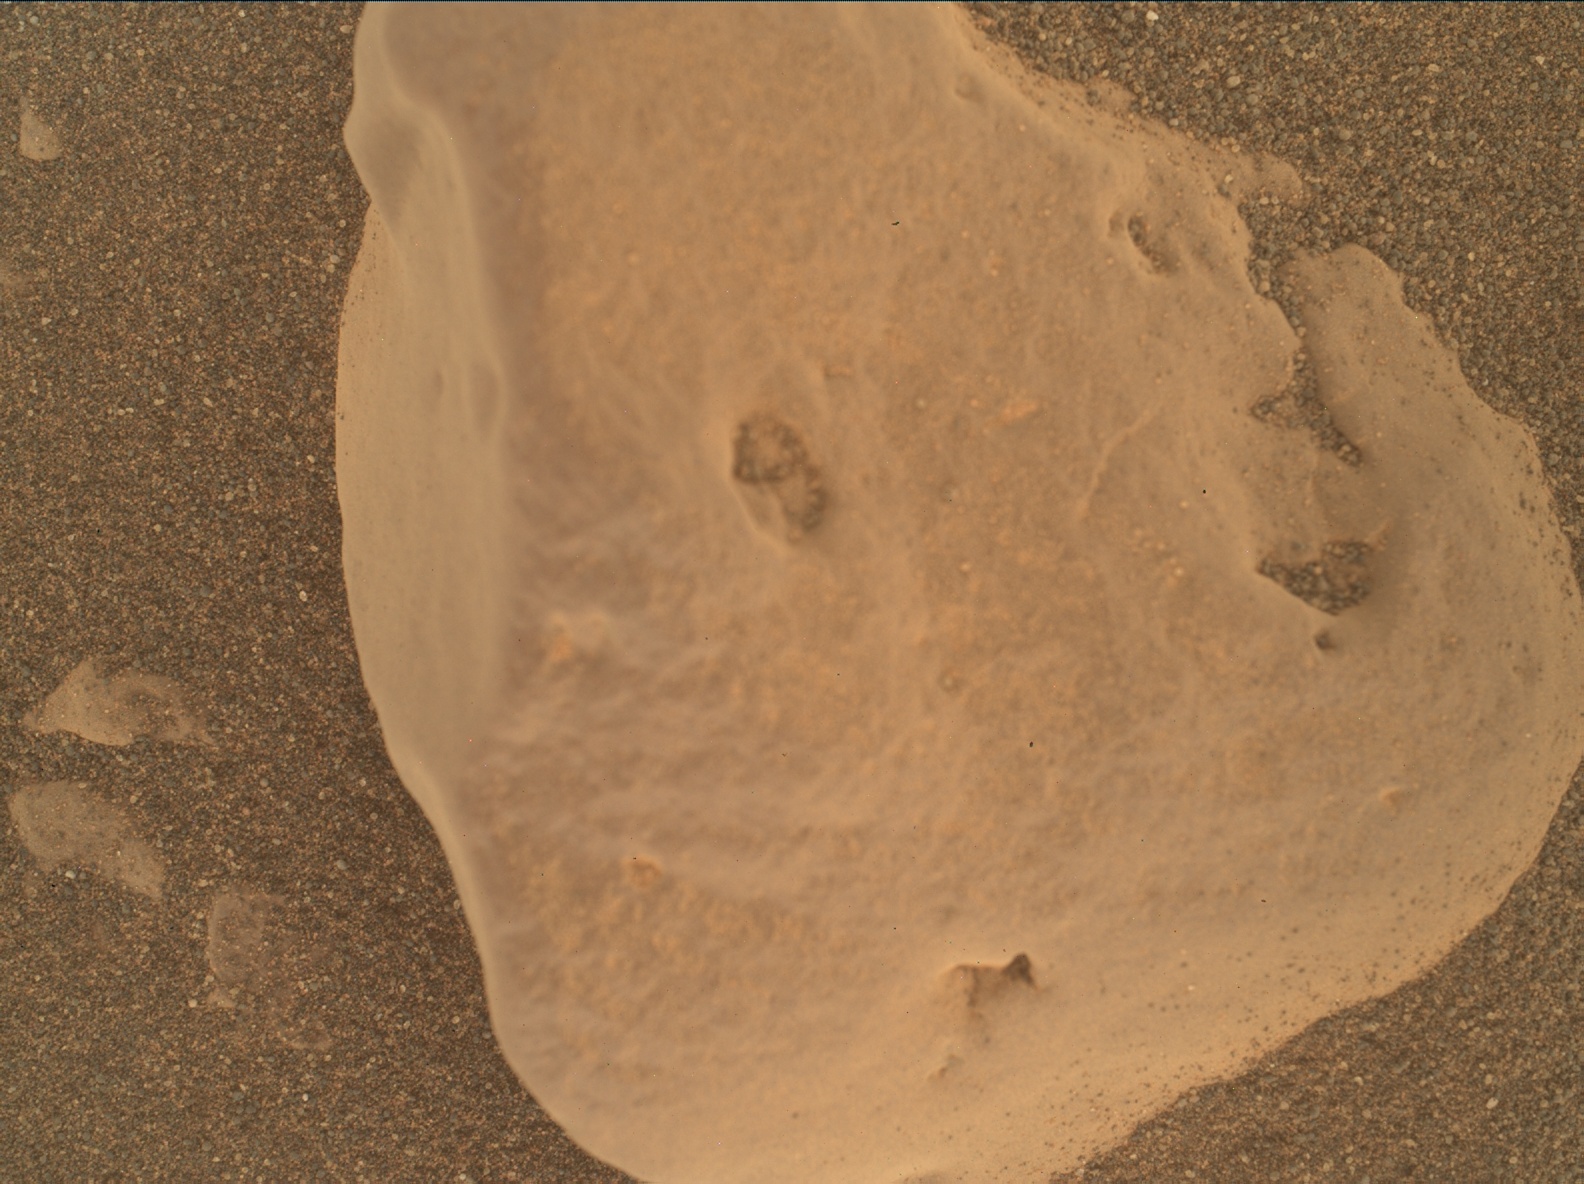 Nasa's Mars rover Curiosity acquired this image using its Mars Hand Lens Imager (MAHLI) on Sol 2468